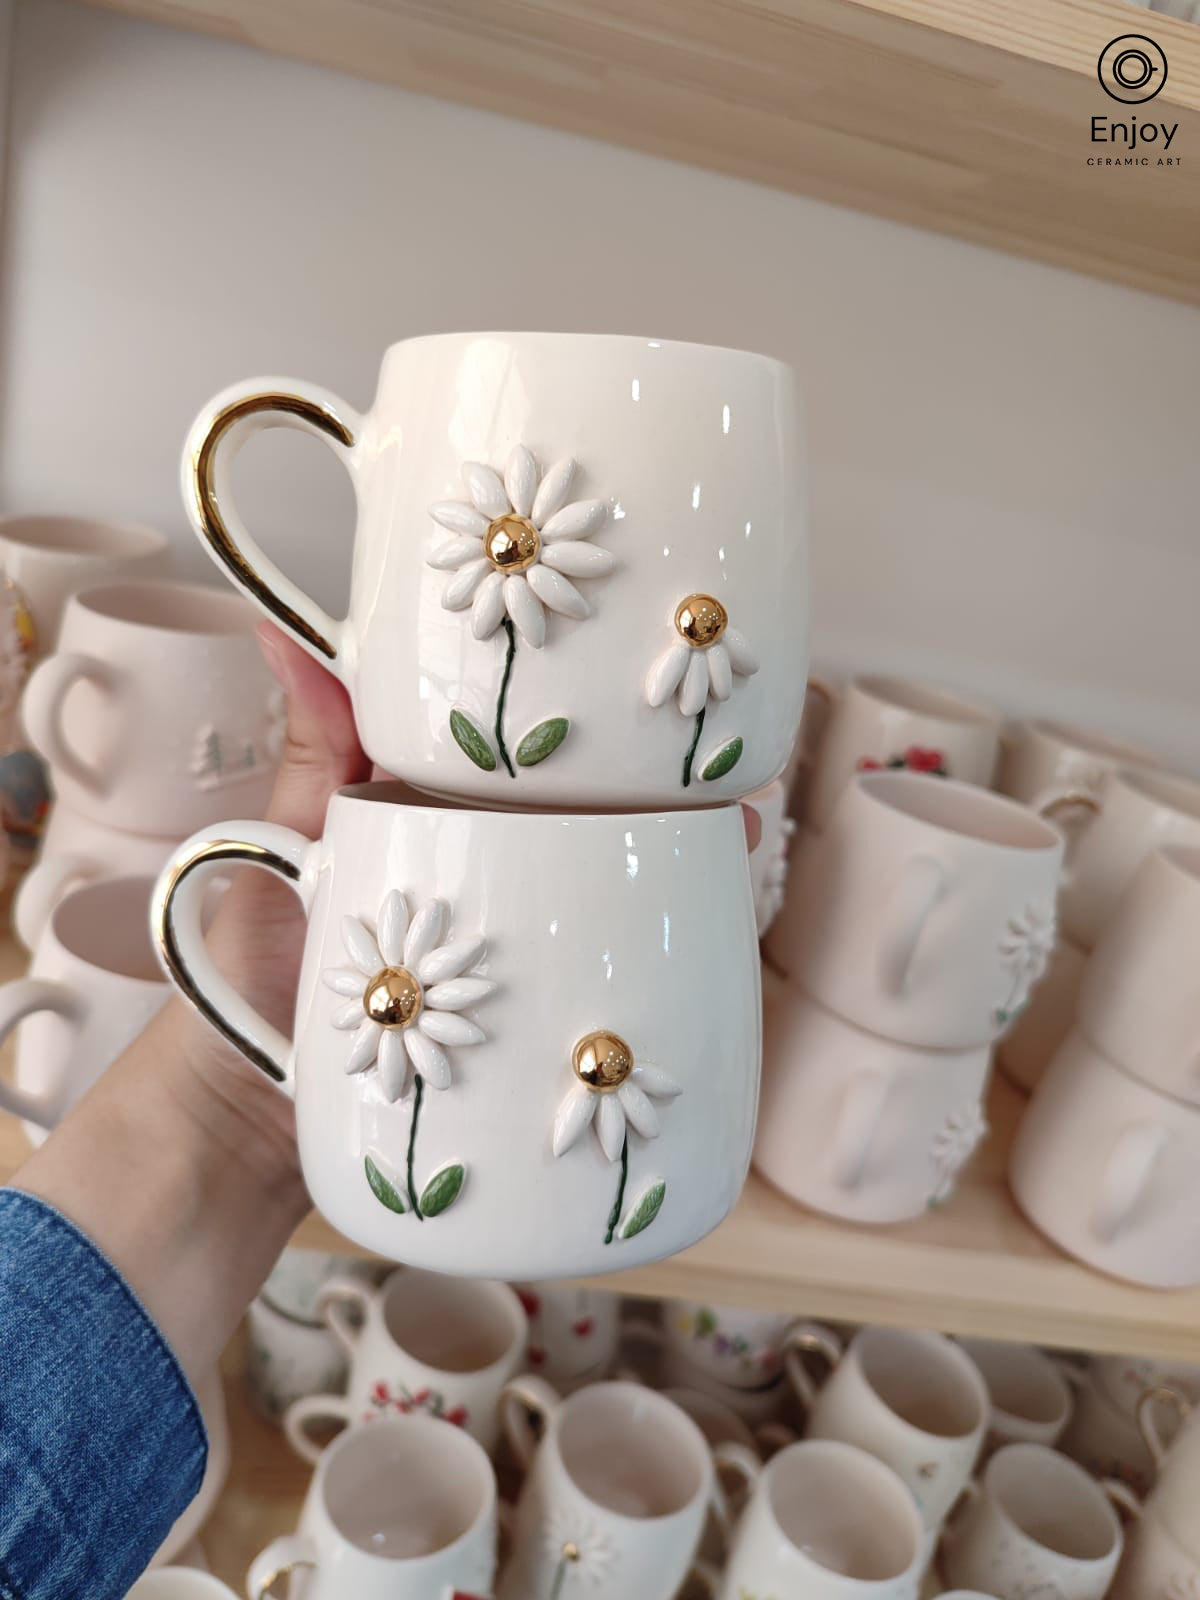 Handmade daisy mug with gold handle and gold center